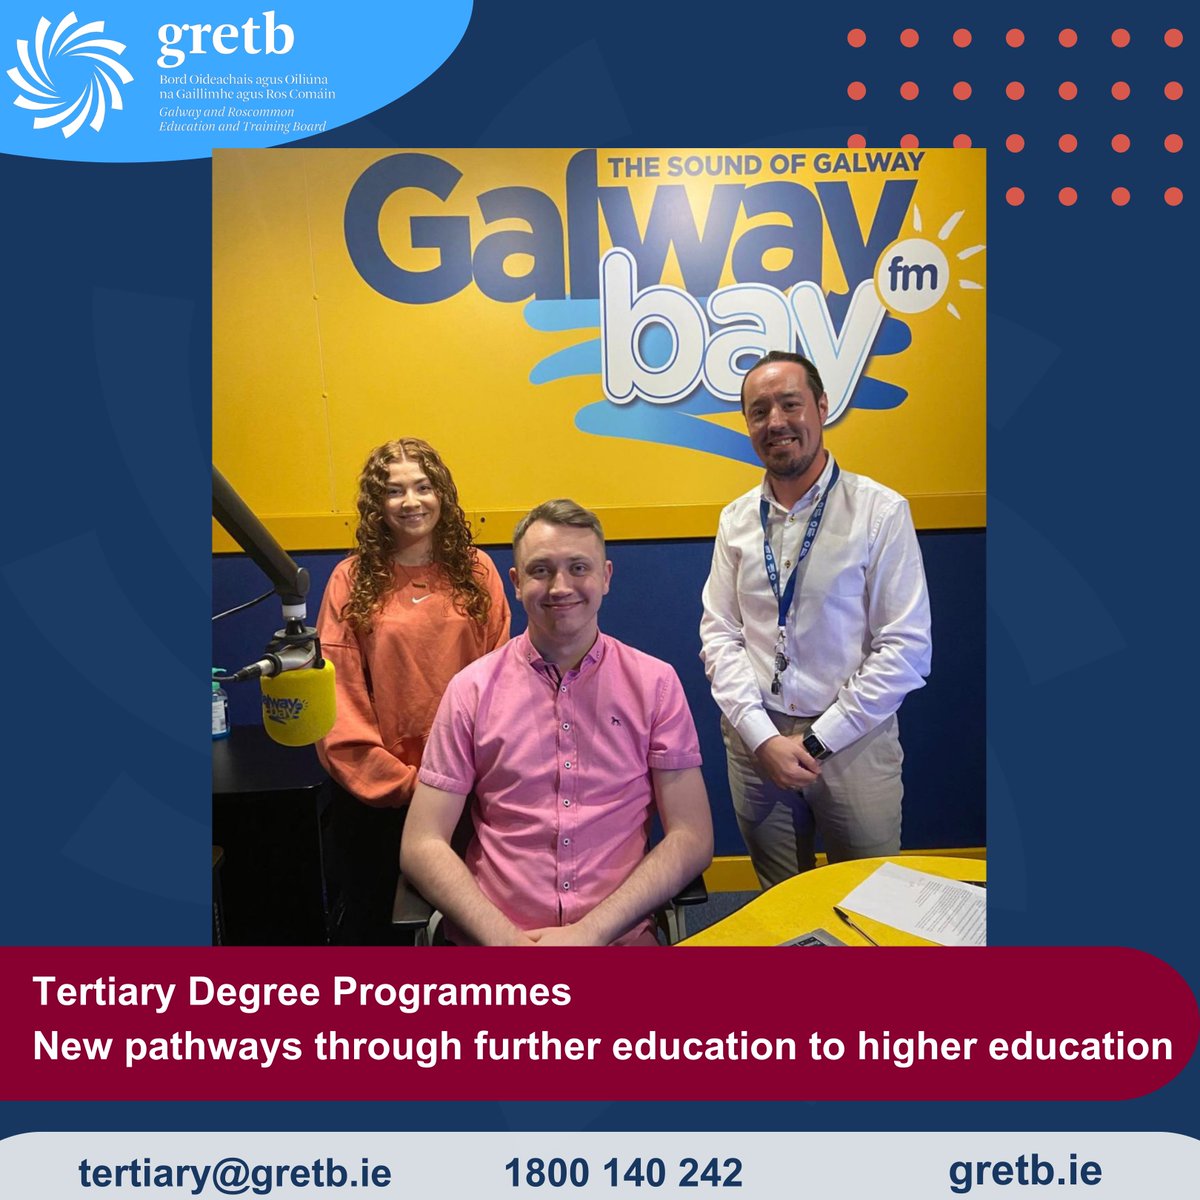 Kate Roche, nursing student and Barry McNally, Guidance Councillor spoke on @gbayfm about access routes into General Nursing through GRETB Tertiary Degrees. You can find the interview on this morning's 9-10am slot, beginning at 24:48 galwaybayfm.ie/listen_back/ga…